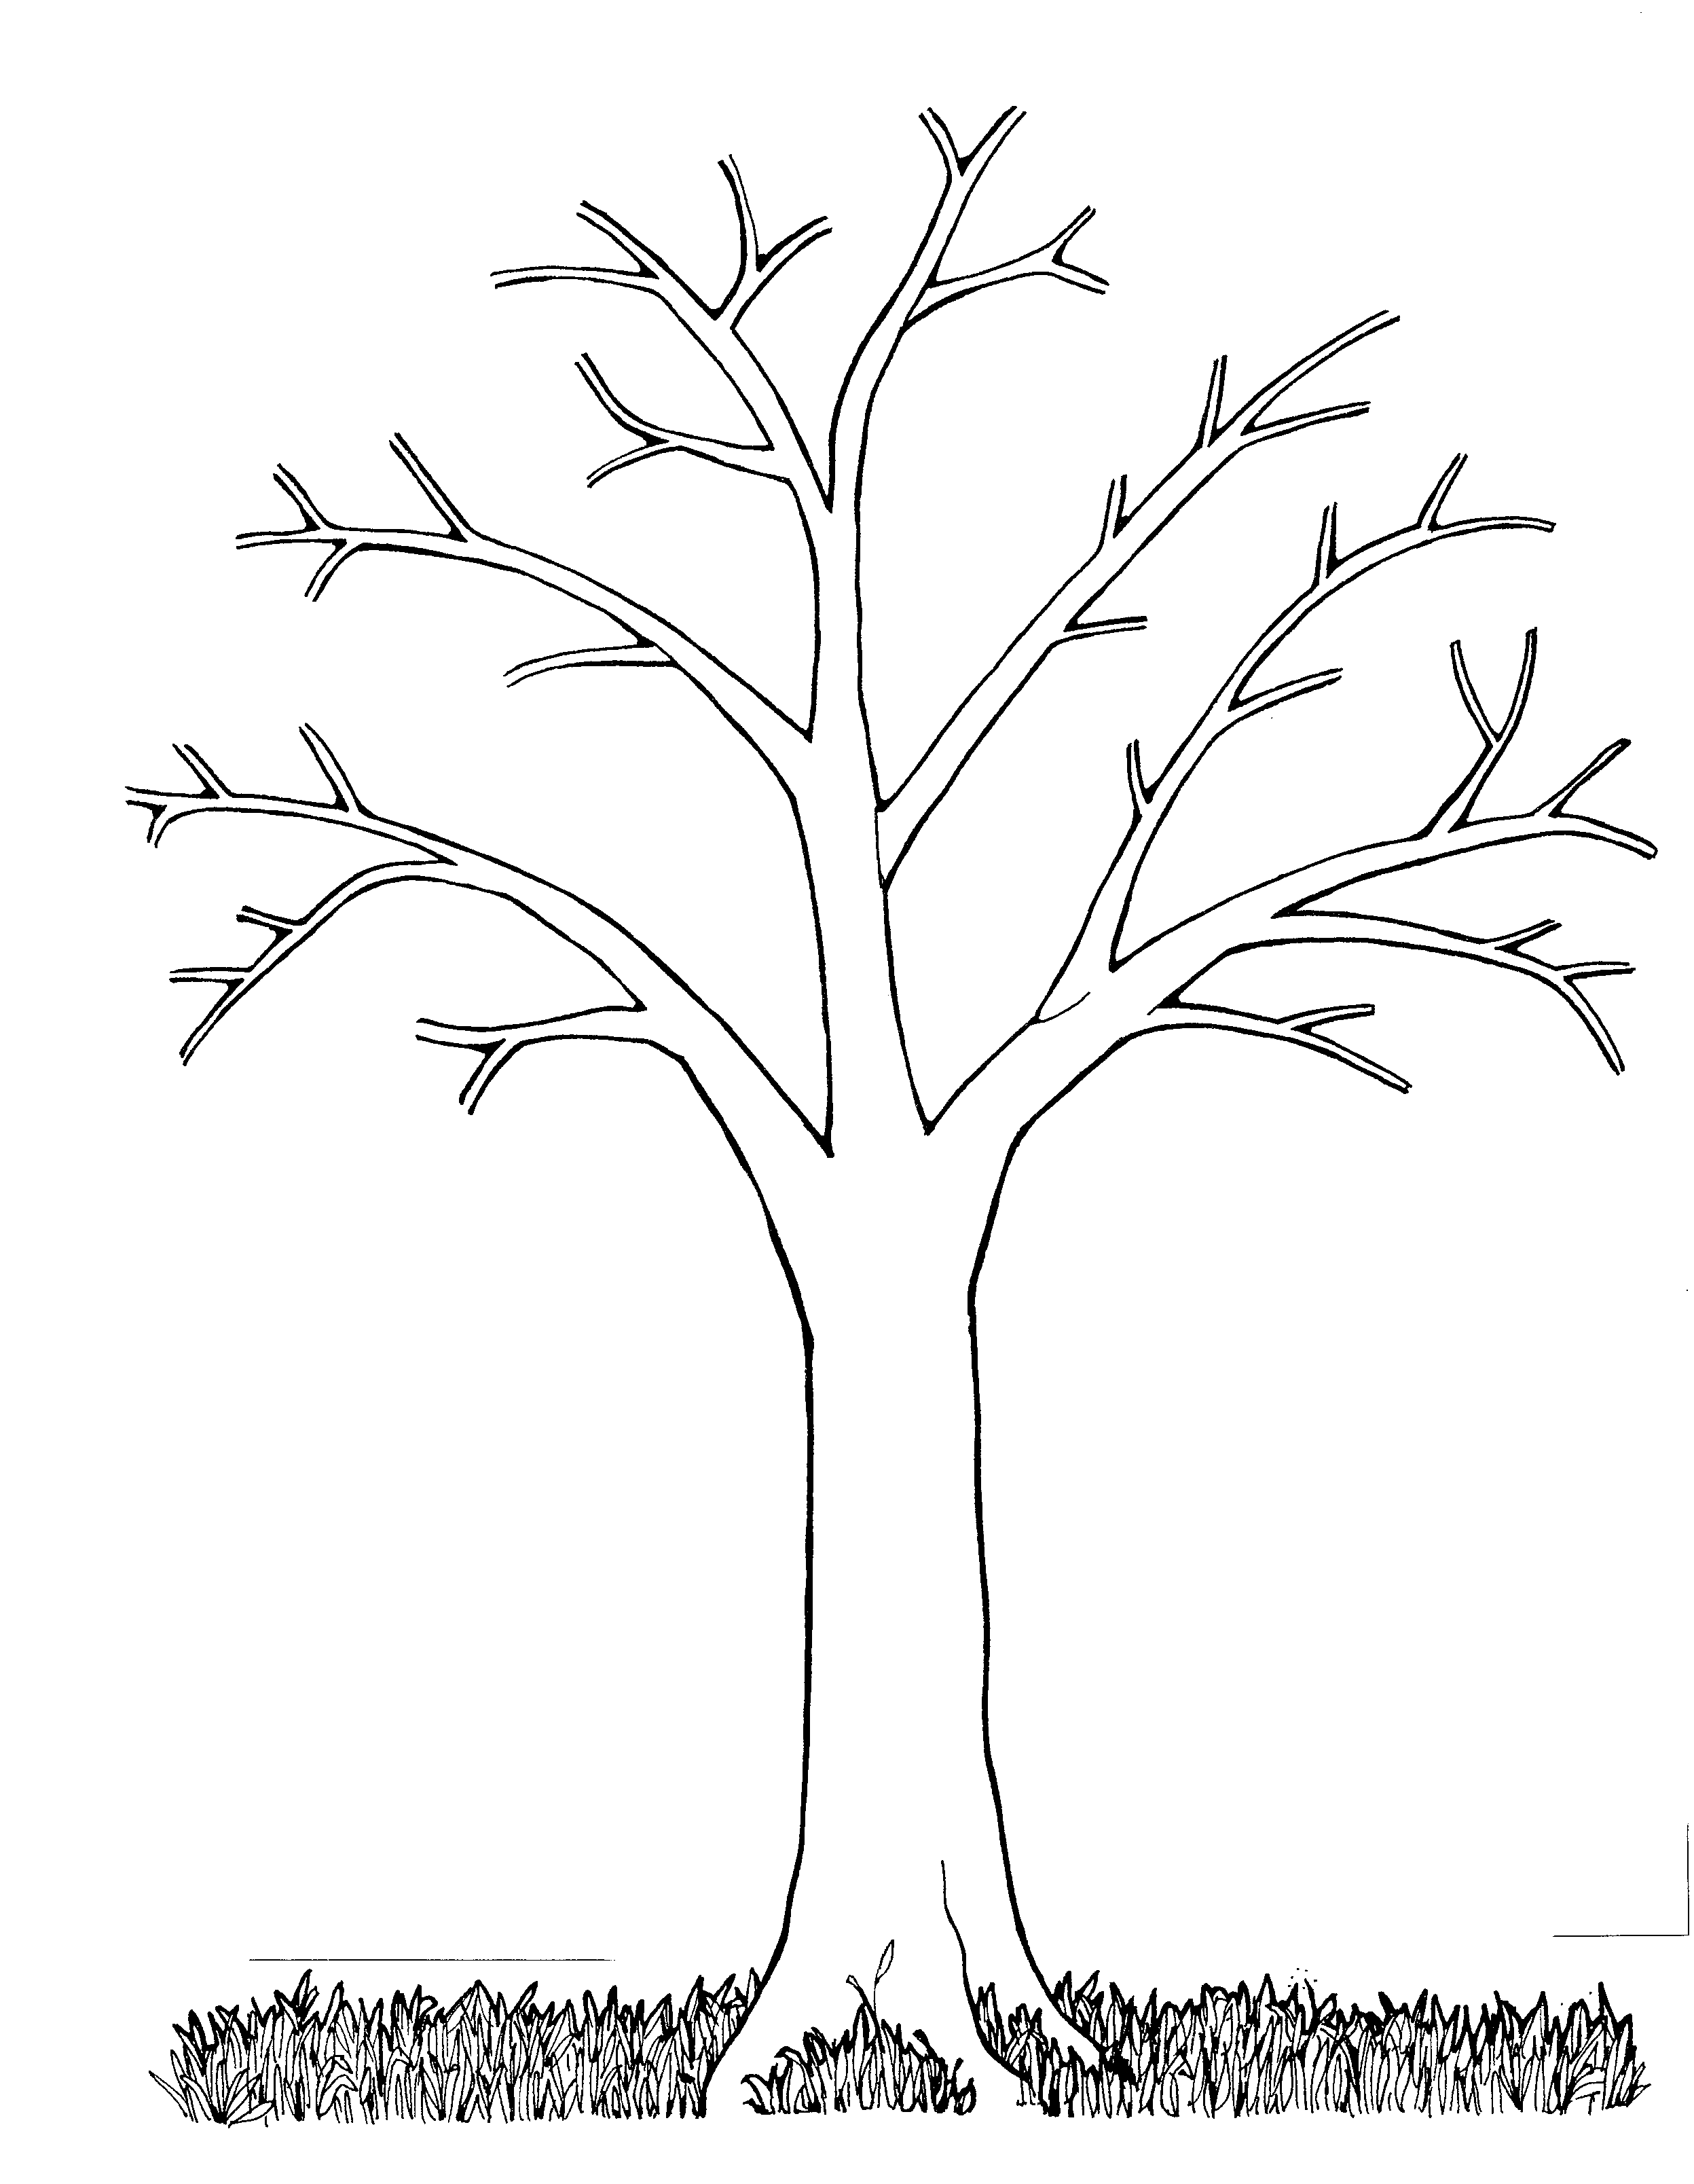 Mormon Share } Tree Bare | Fall trees, White image and Clip art